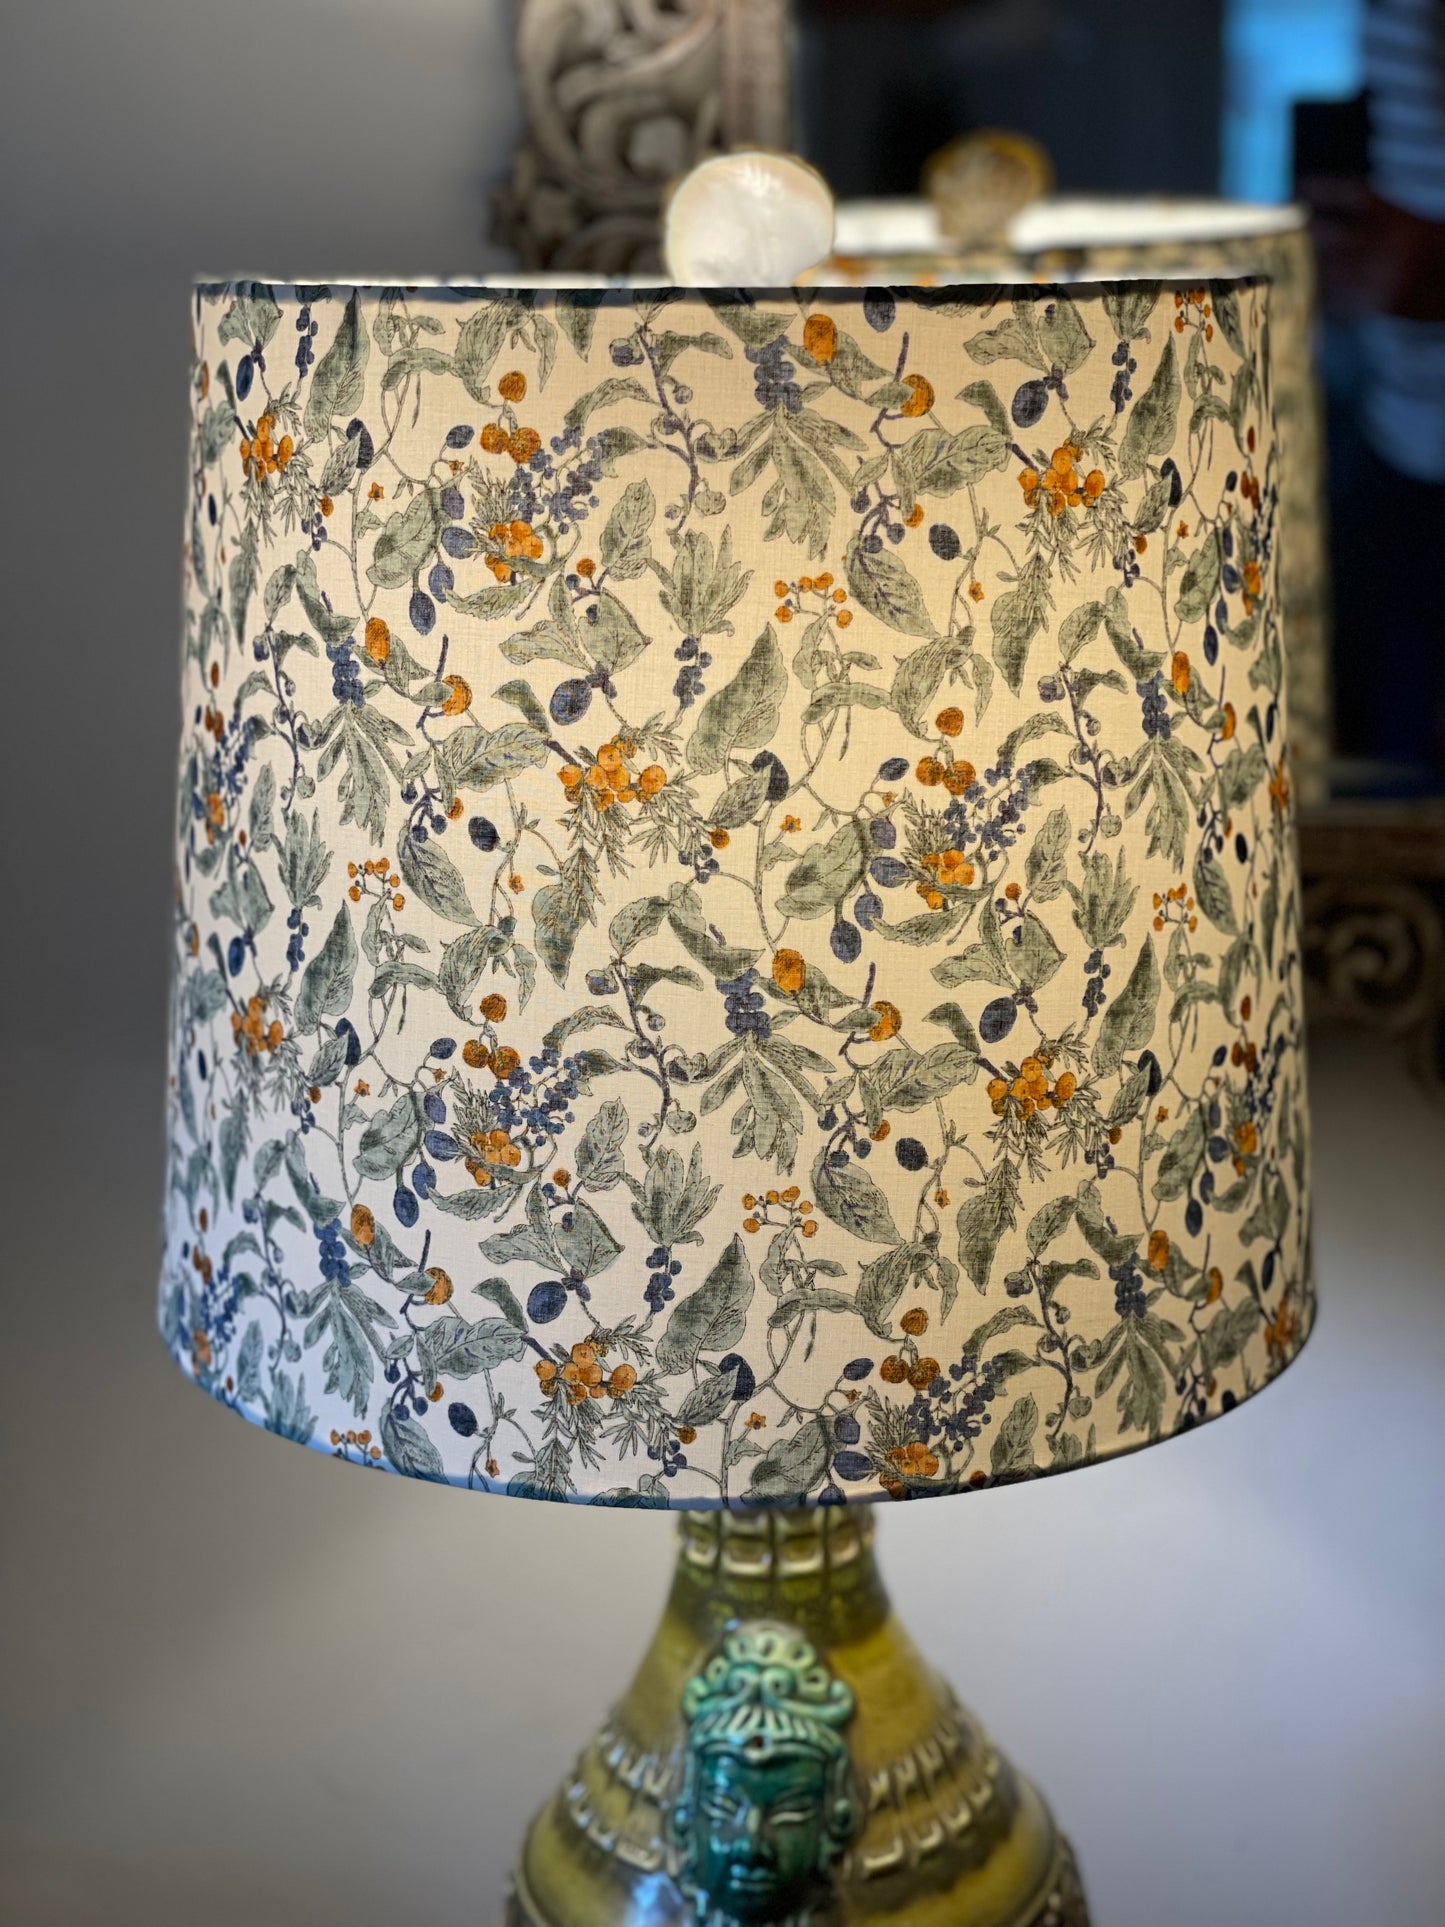 Large Empire Lampshade. 11.75 x 13.75 x 11.75. Japanese Cotton Print. Ivory with Blue and Golden Brown Berry with Sage Floral Motif.